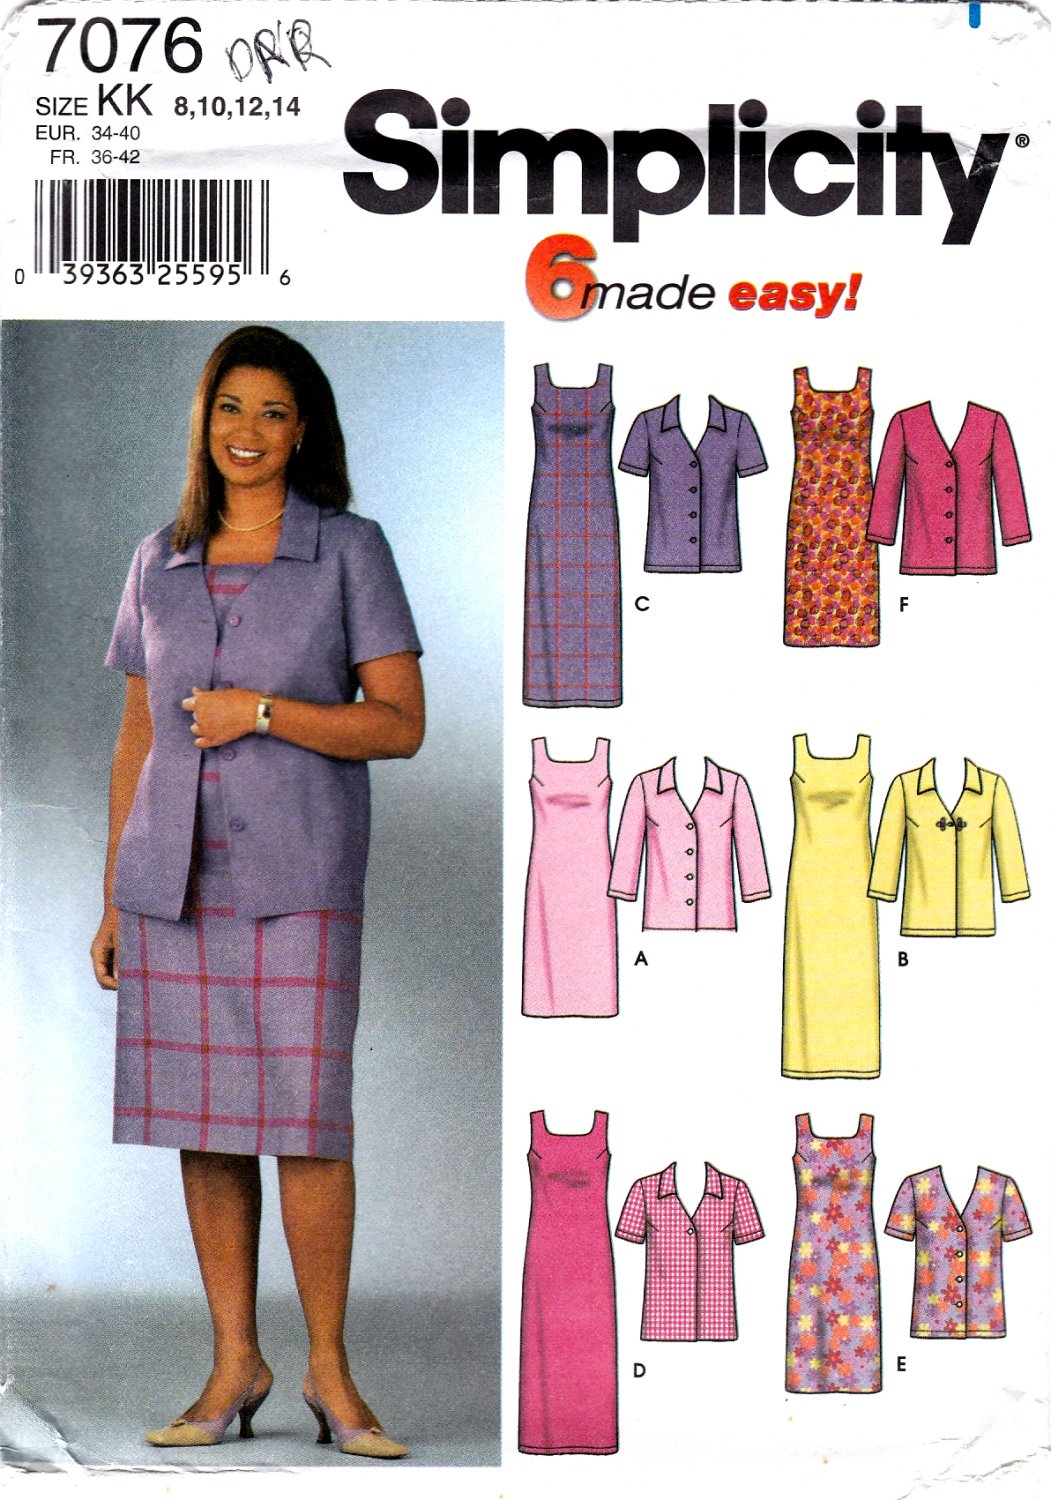 Simplicity 7076 Misses Petite Jacket Dress Two Lengths Sewing Pattern Sizes 8-10-12-14